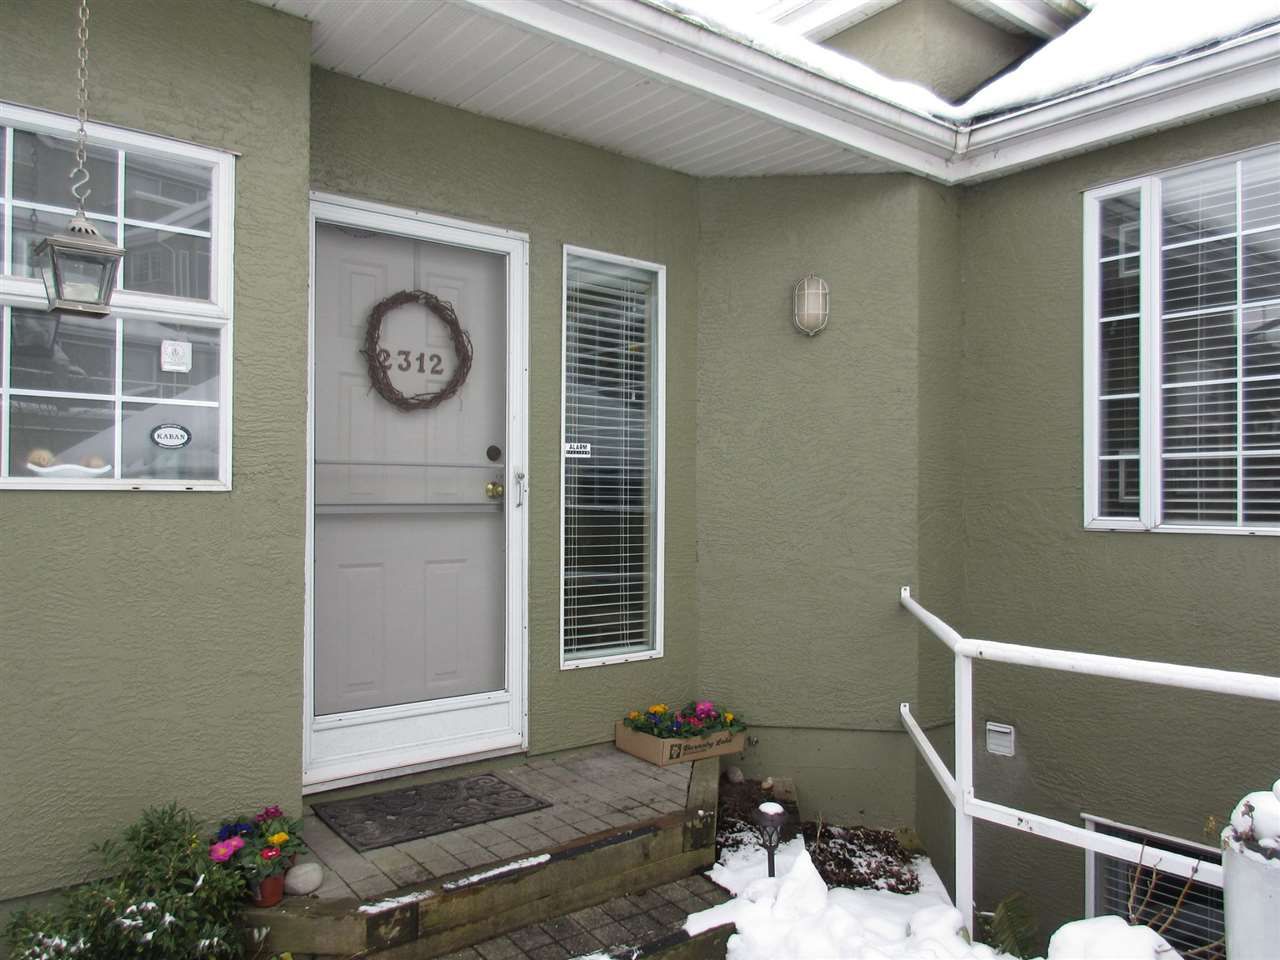 Main Photo: 2312 QUAYSIDE COURT in Vancouver: Fraserview VE Townhouse for sale (Vancouver East)  : MLS®# R2137653